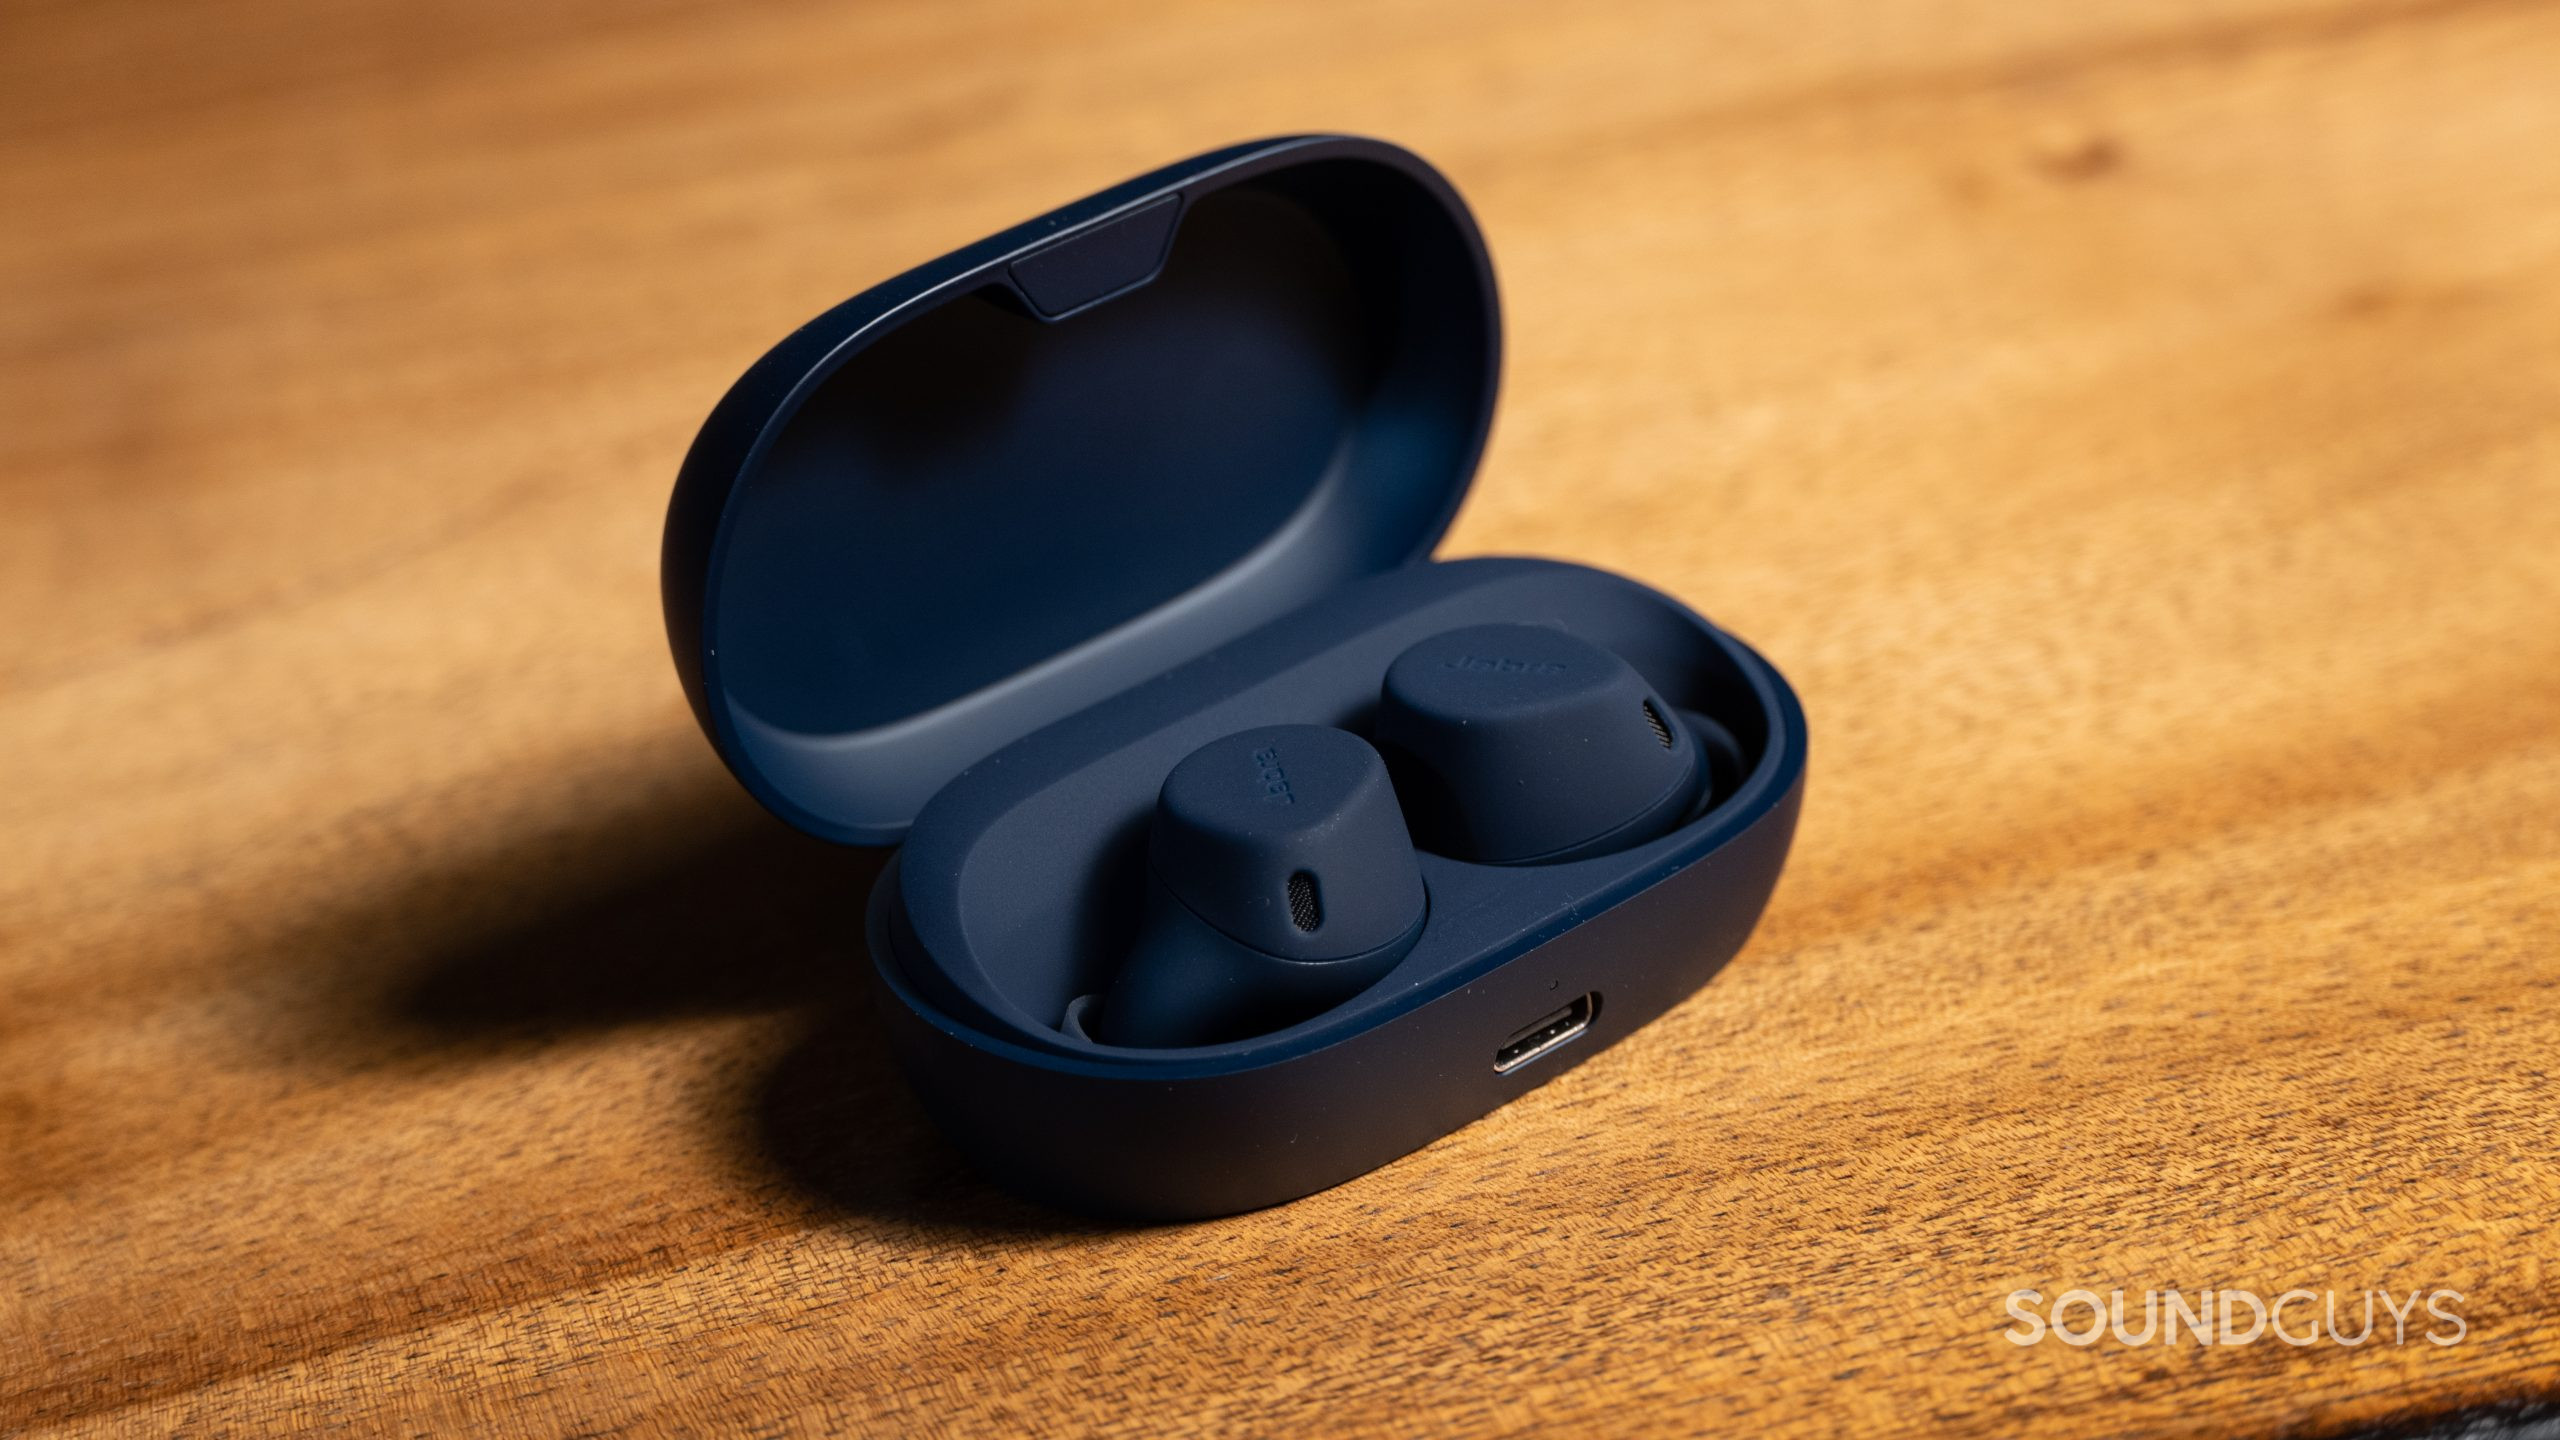 Jabra Elite 7 Active earbuds inside the charging case on a wood table